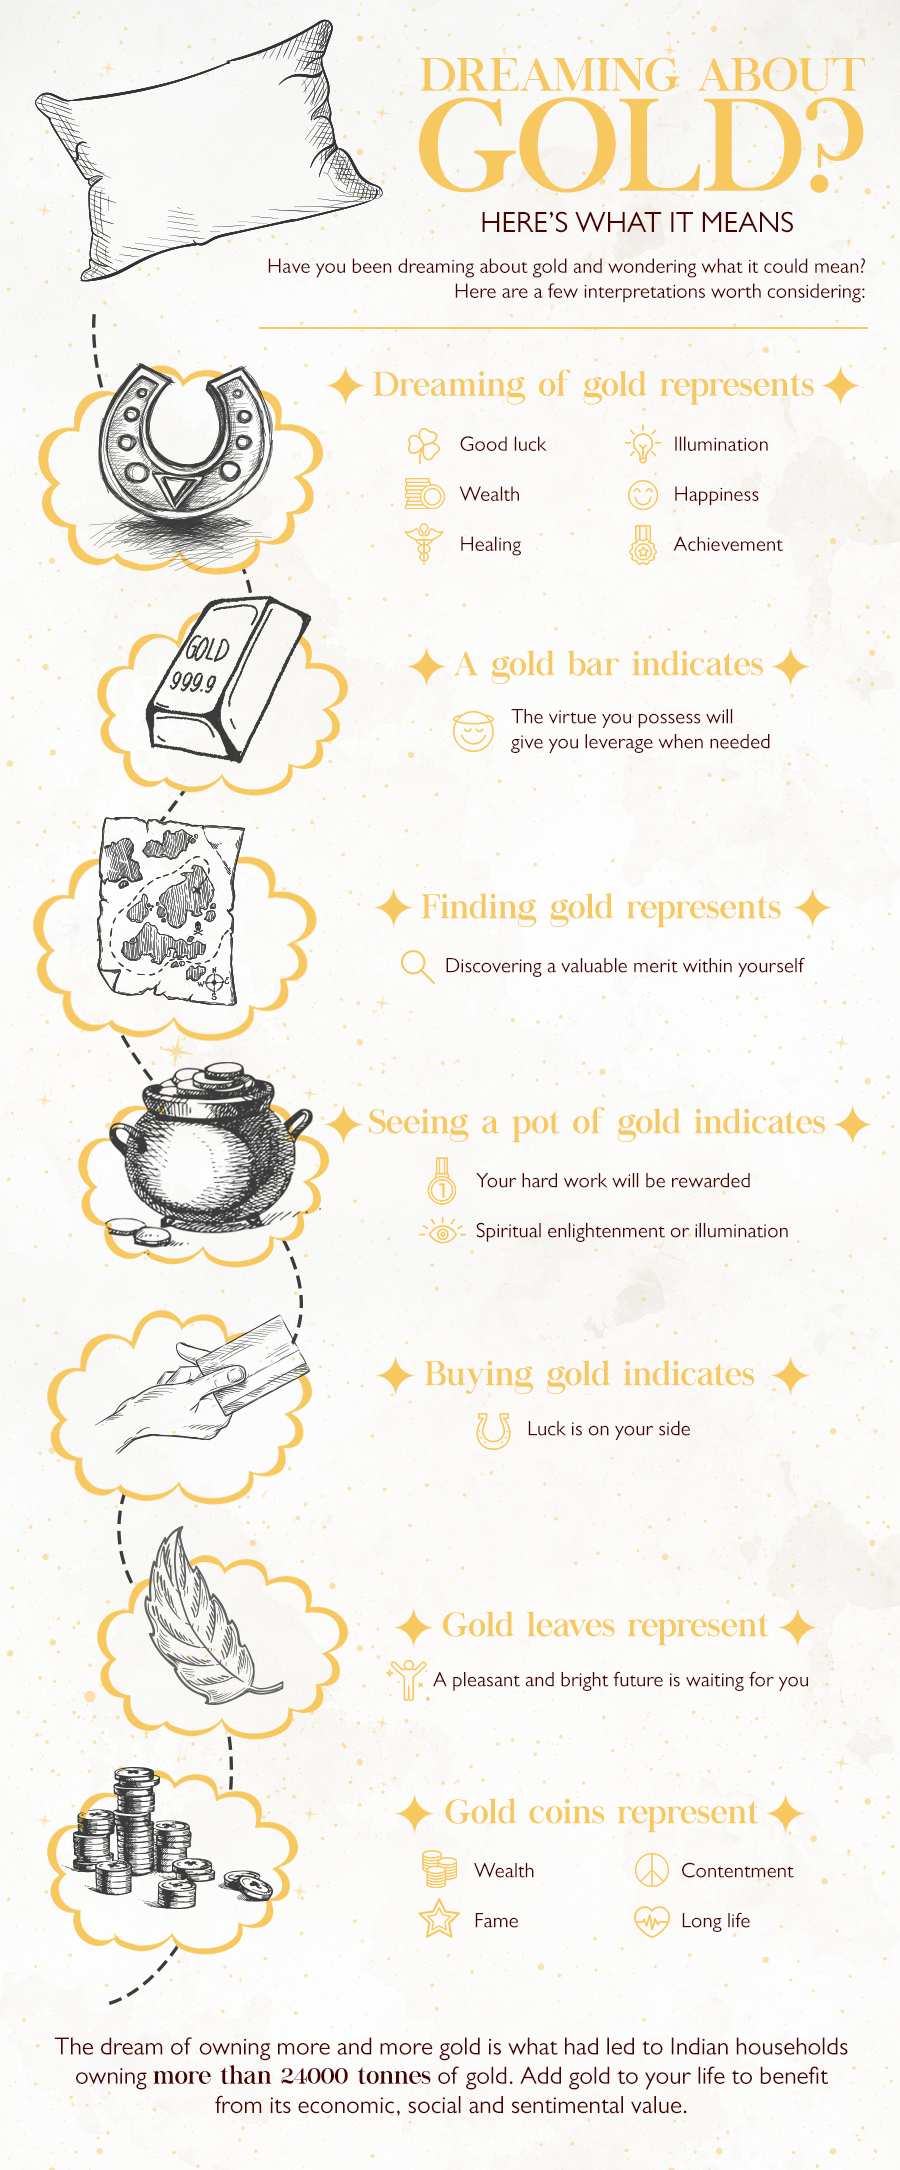 Did you know people believe that dreaming about gold indicates that luck is in your favour? Check out the significance and meaning of dreaming about gold with this infographic.